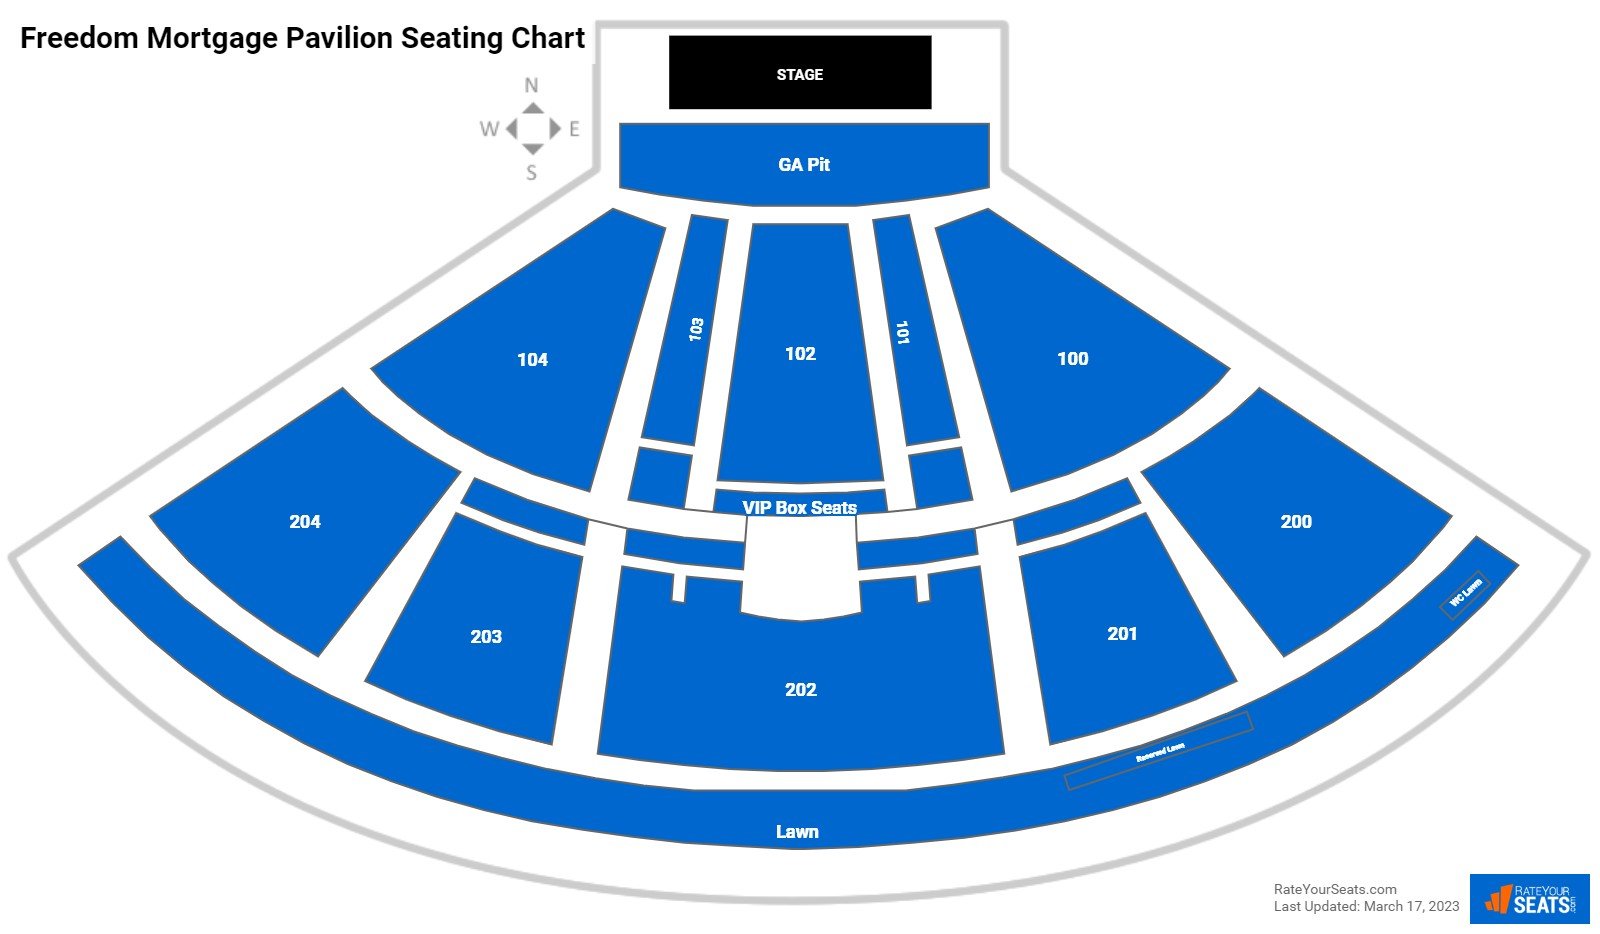 Freedom Mortgage Pavilion Concert Seating Chart